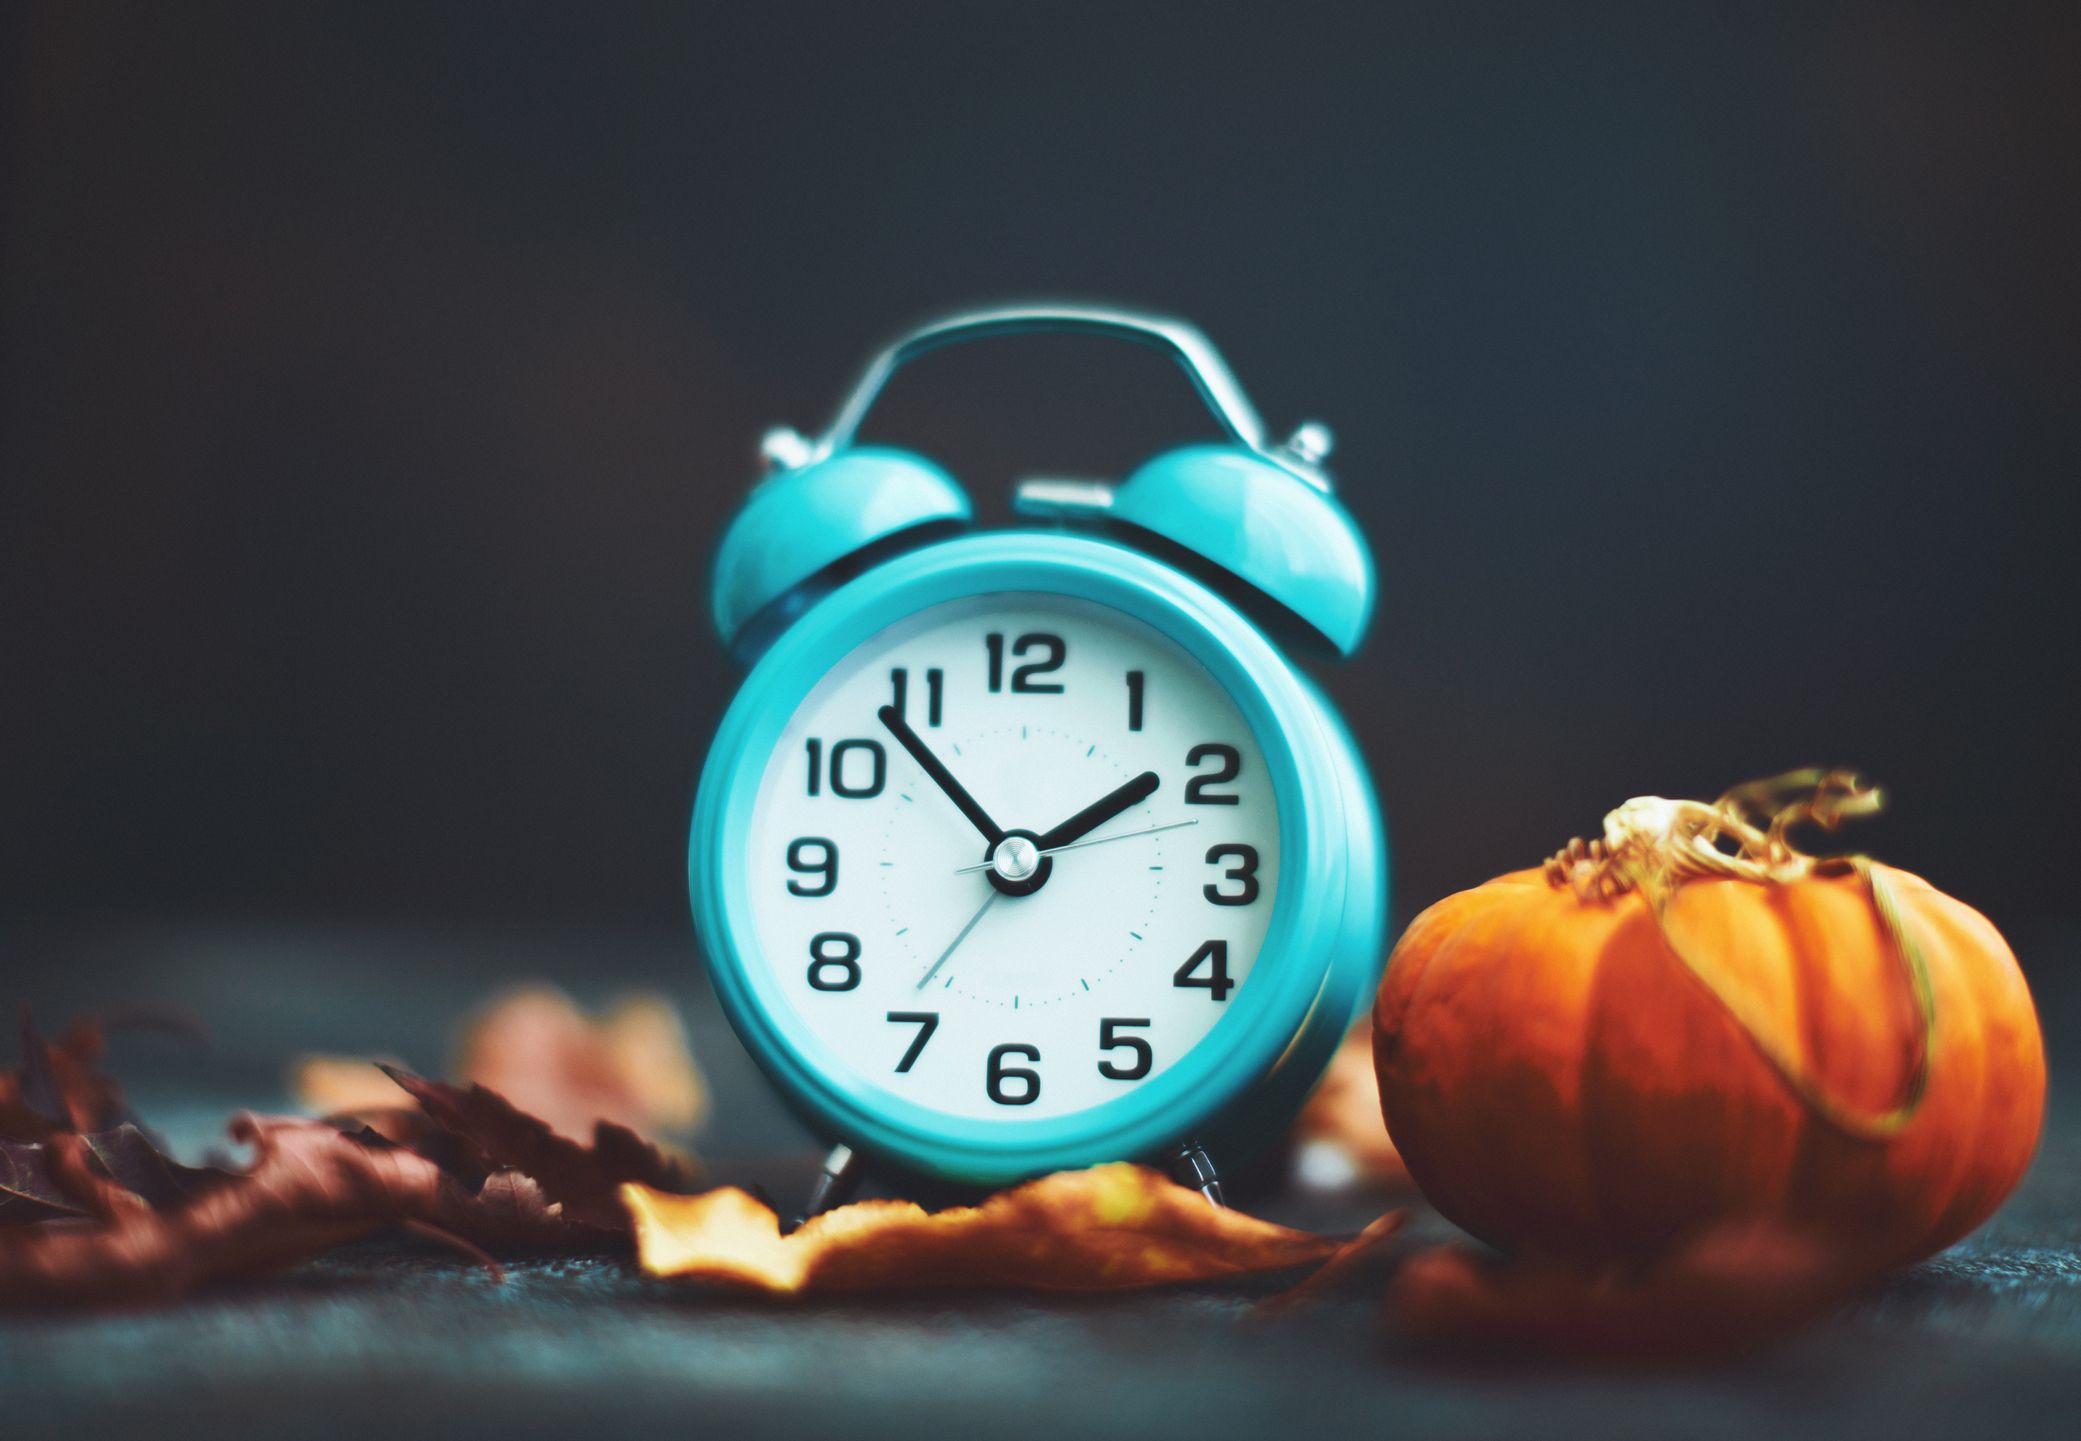 2023 daylight savings time: When we fall back, Sunshine Protection Act